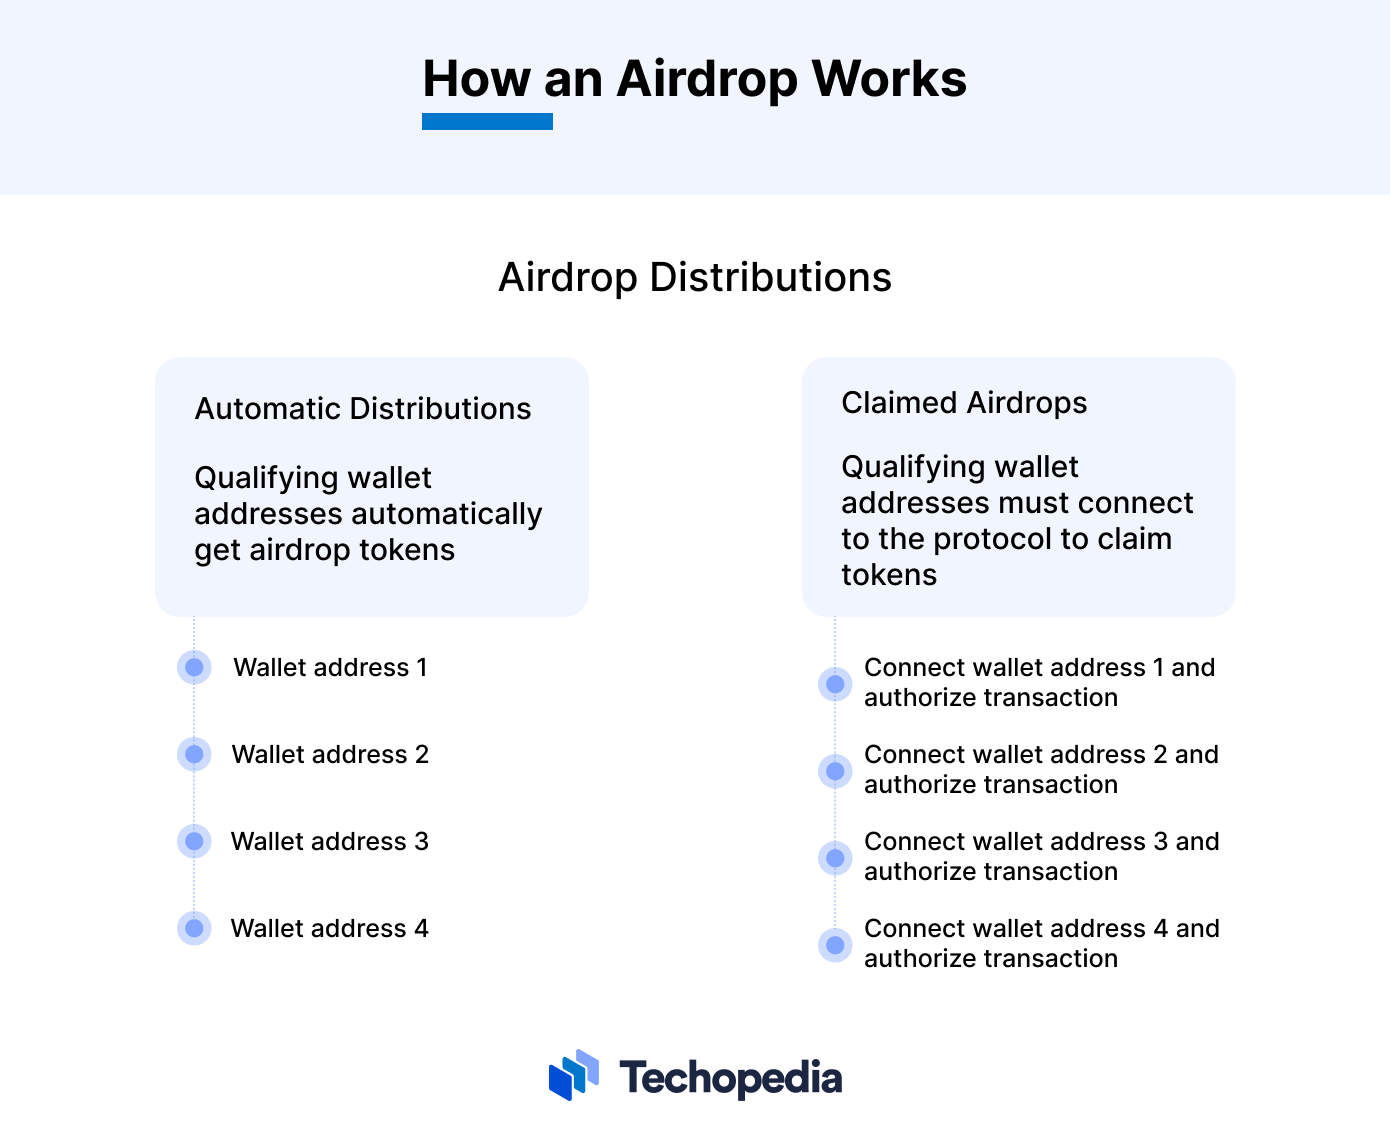 How an Airdrop Works